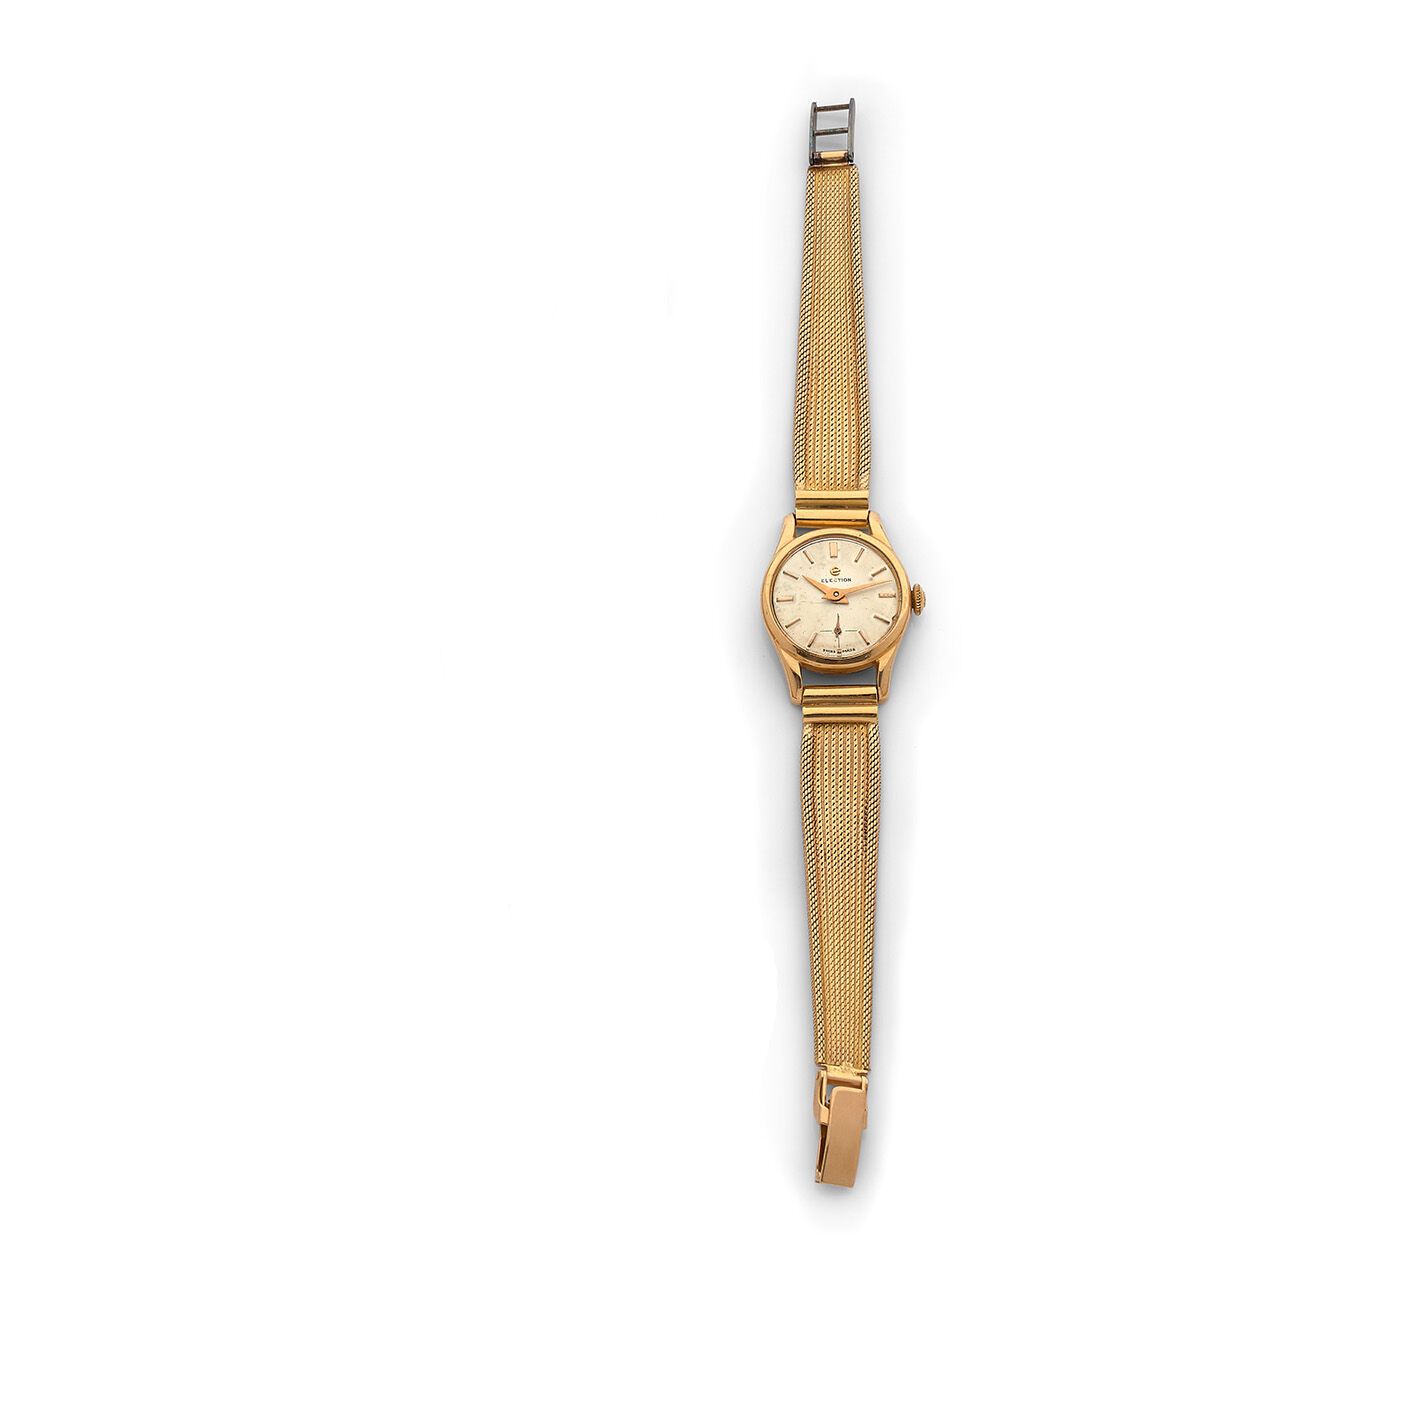 ELECTION ELECTION
Ladies' watch in 18K (750 thousandths) gold, silvered dial, go&hellip;